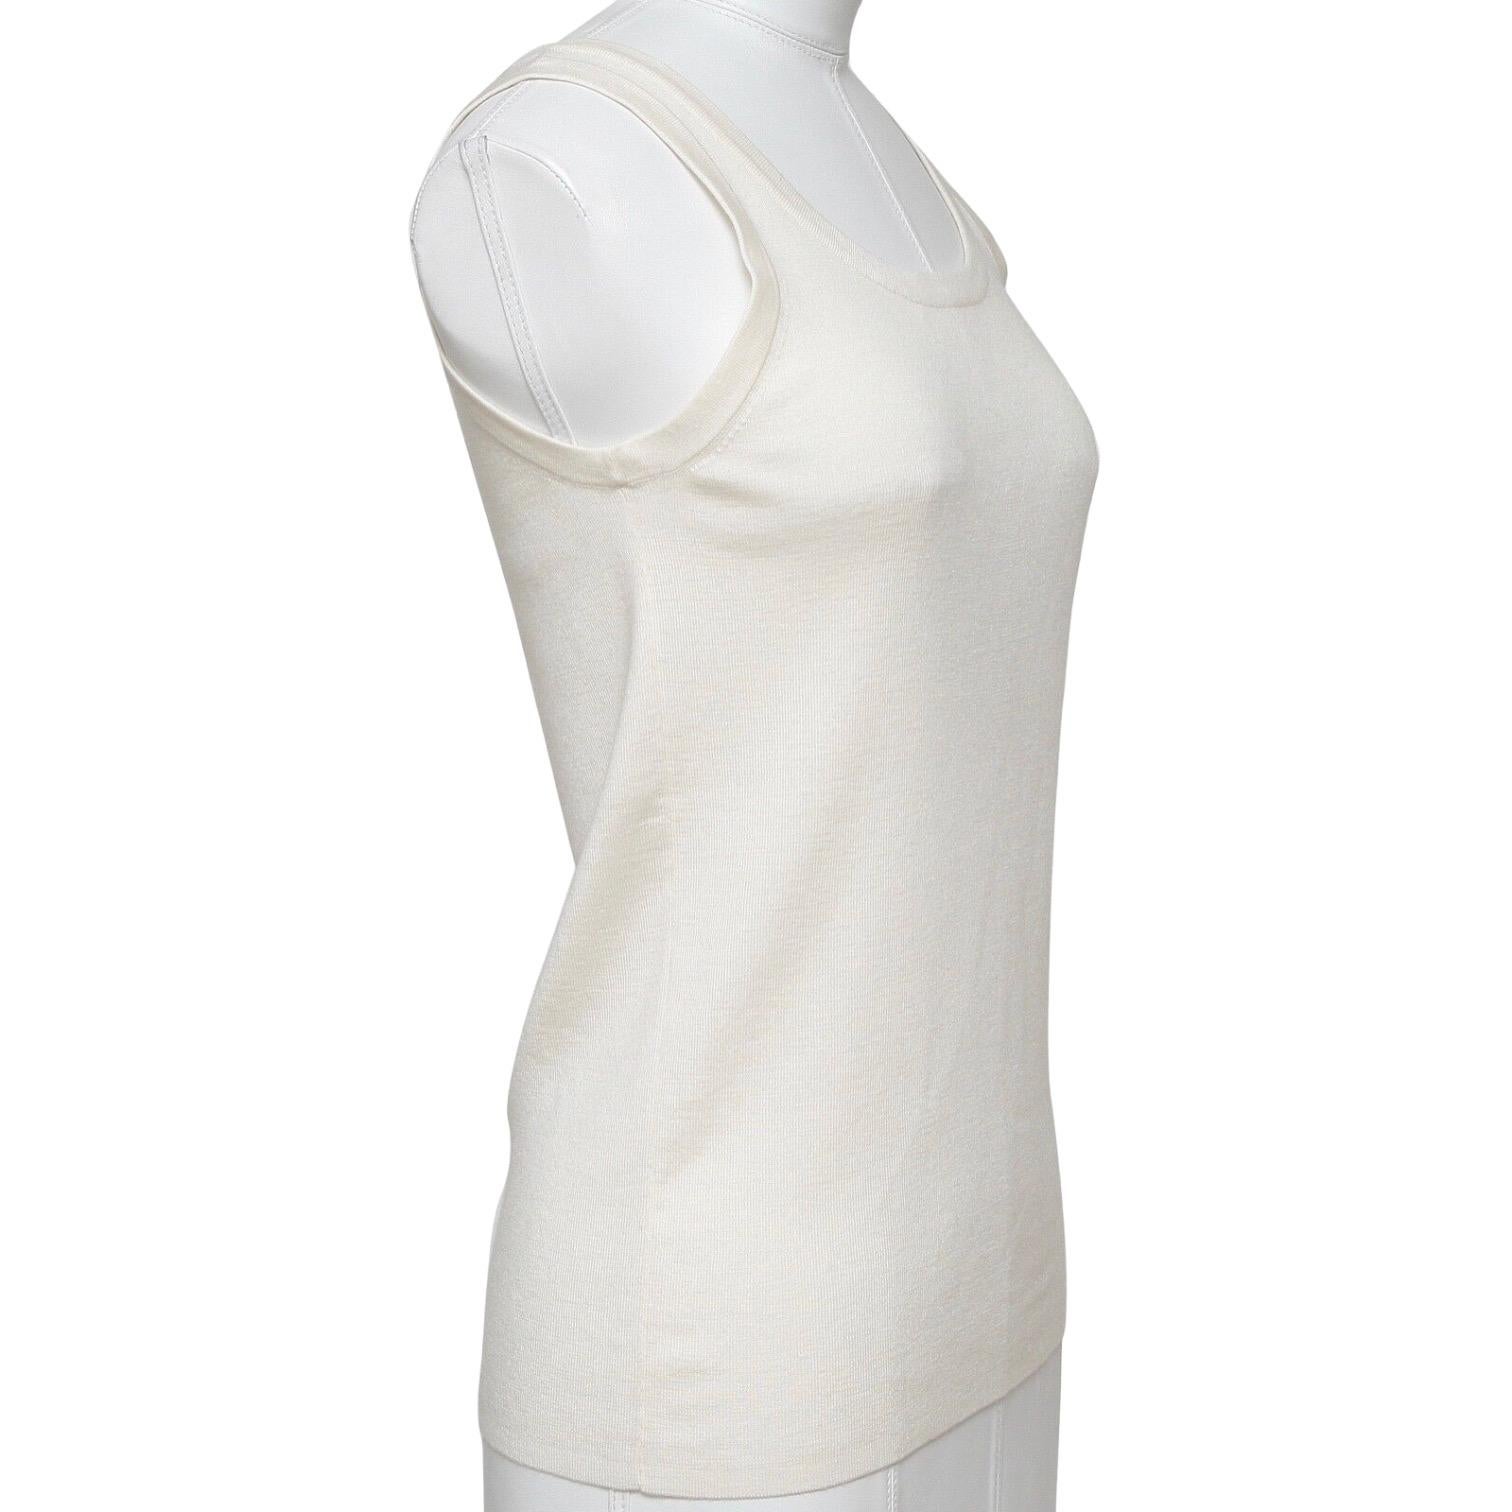 
Design:
- Classic sleeveless knit top in a neutral cream color.
- Pullover.
- Lightweight.

Size: US 8, F 40

Material: 100% Wool

Measurements (Approximate laid flat, material has a good amount of give):
- Underarm to Underarm: 15